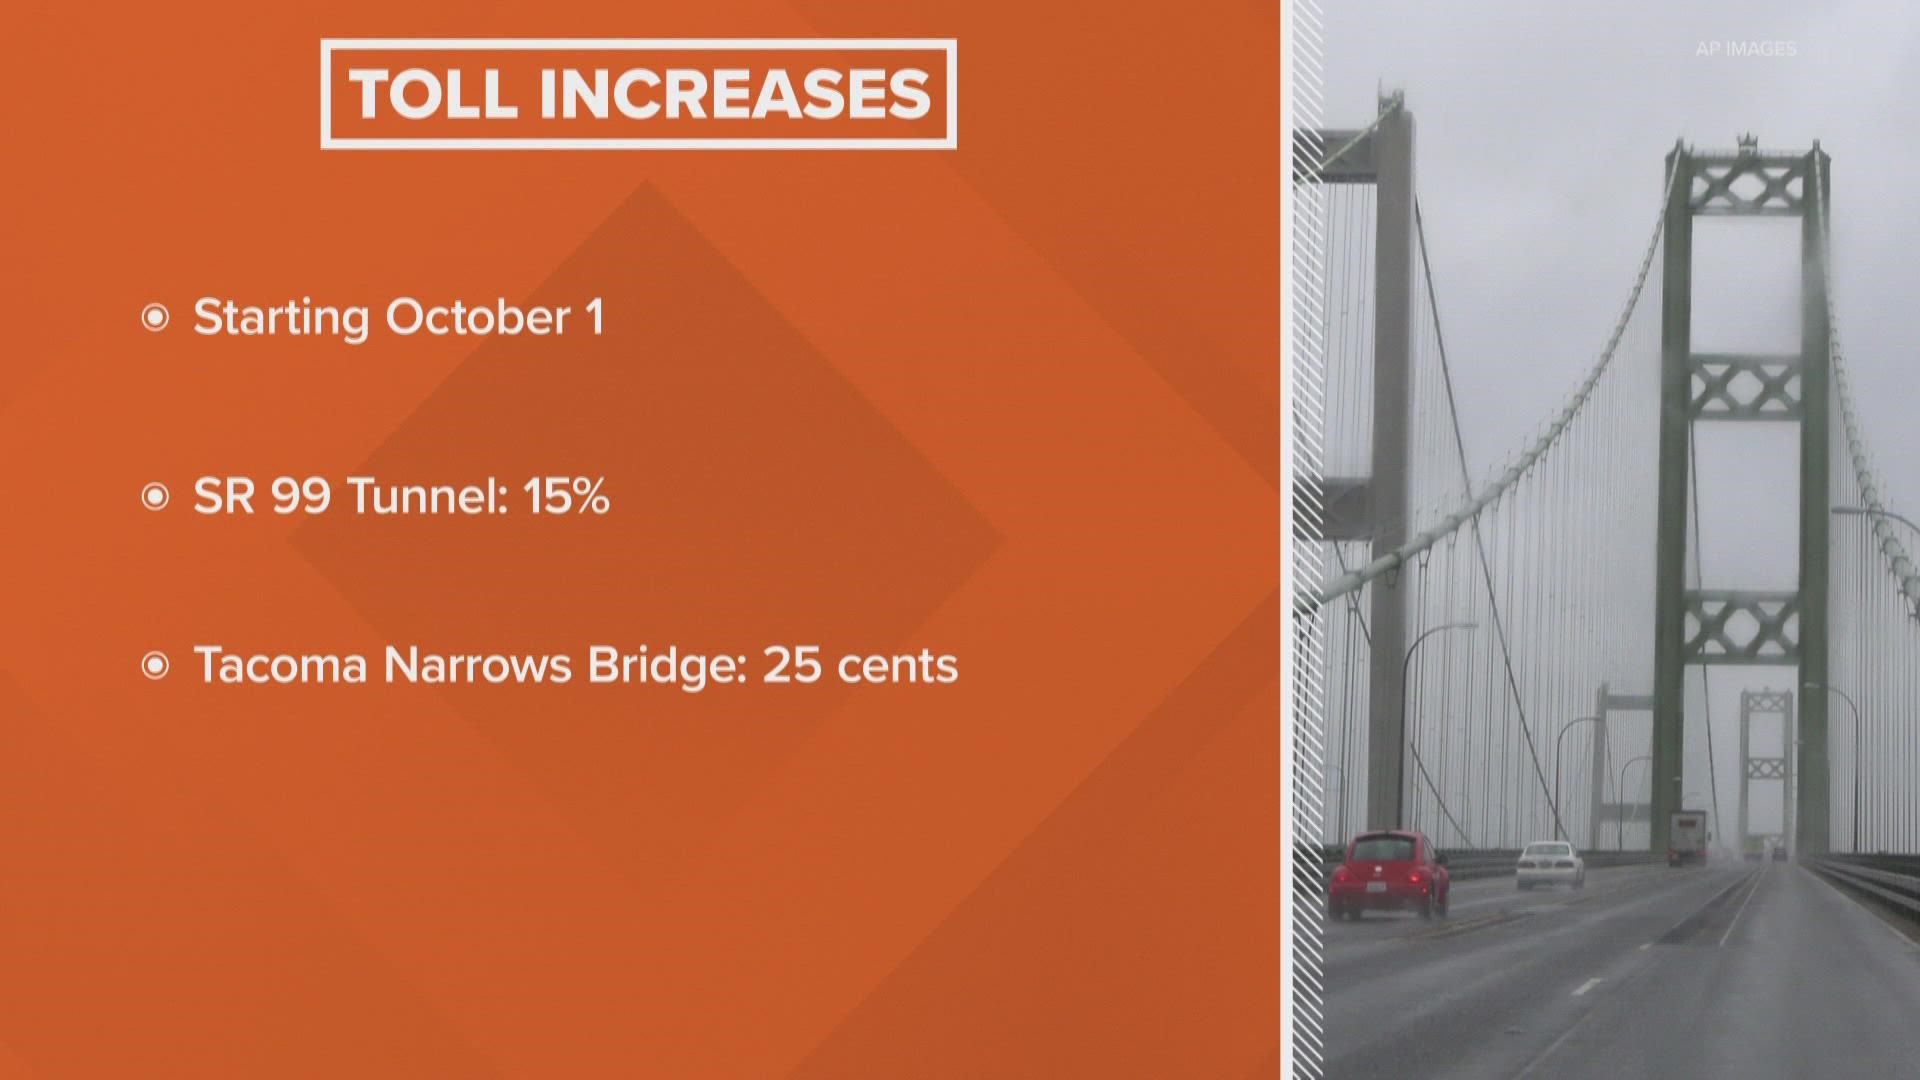 Toll rates will increase for the Seattle tunnel and Tacoma Narrows Bridge starting Friday.